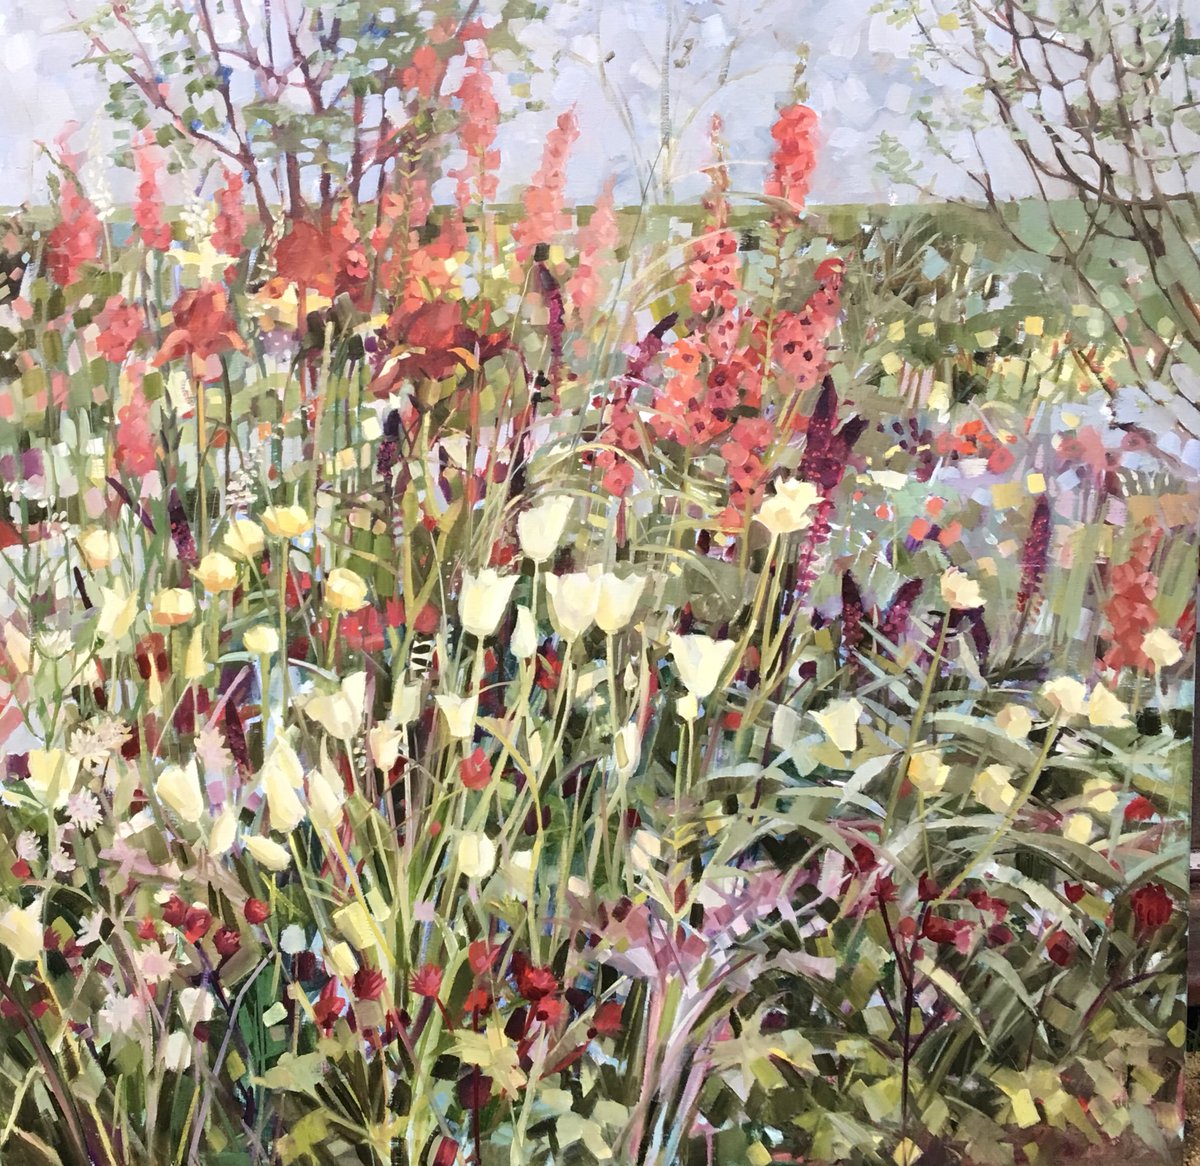 Nearly finished... #gardens #gardenpainting #flowers #floral #flowerpainting #oilpainting